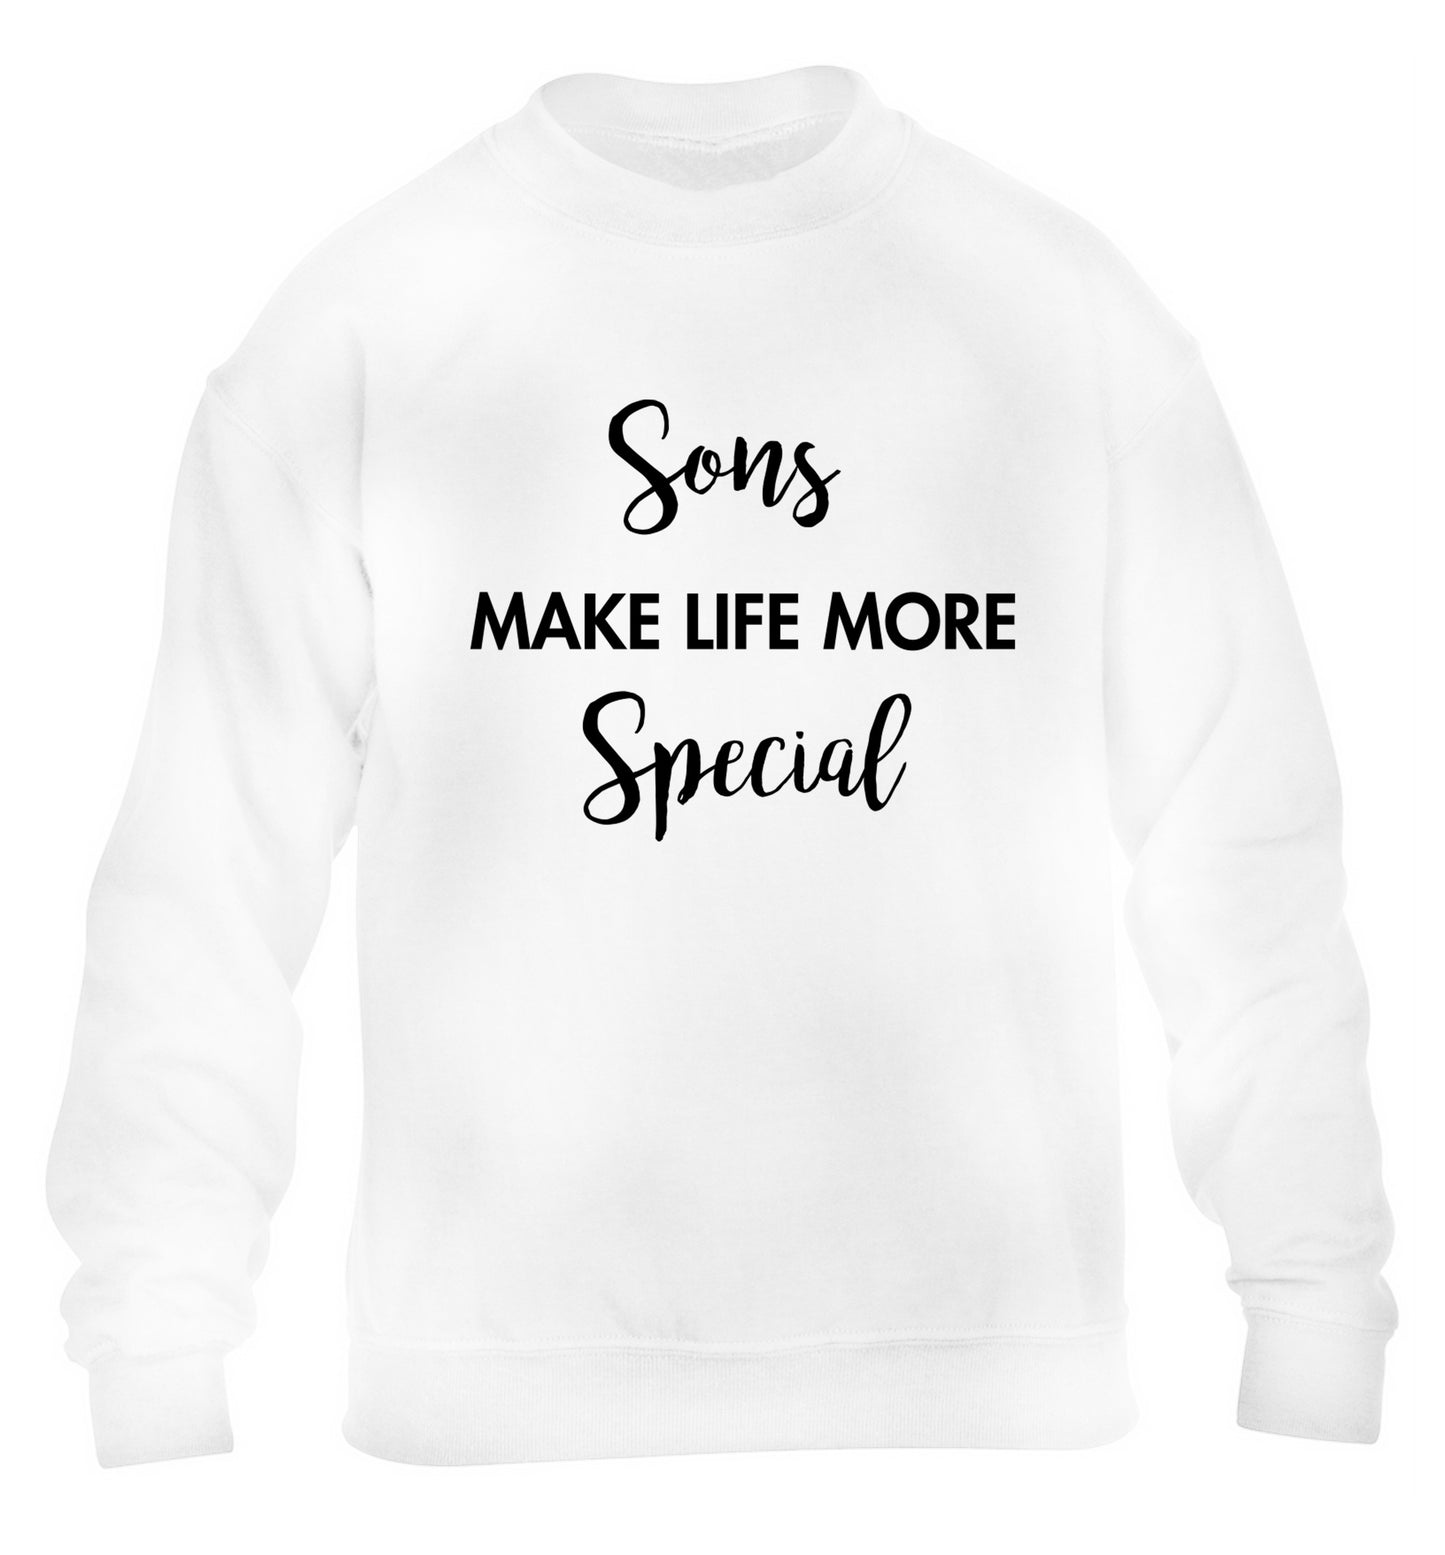 Daughters make life more special children's white sweater 12-14 Years